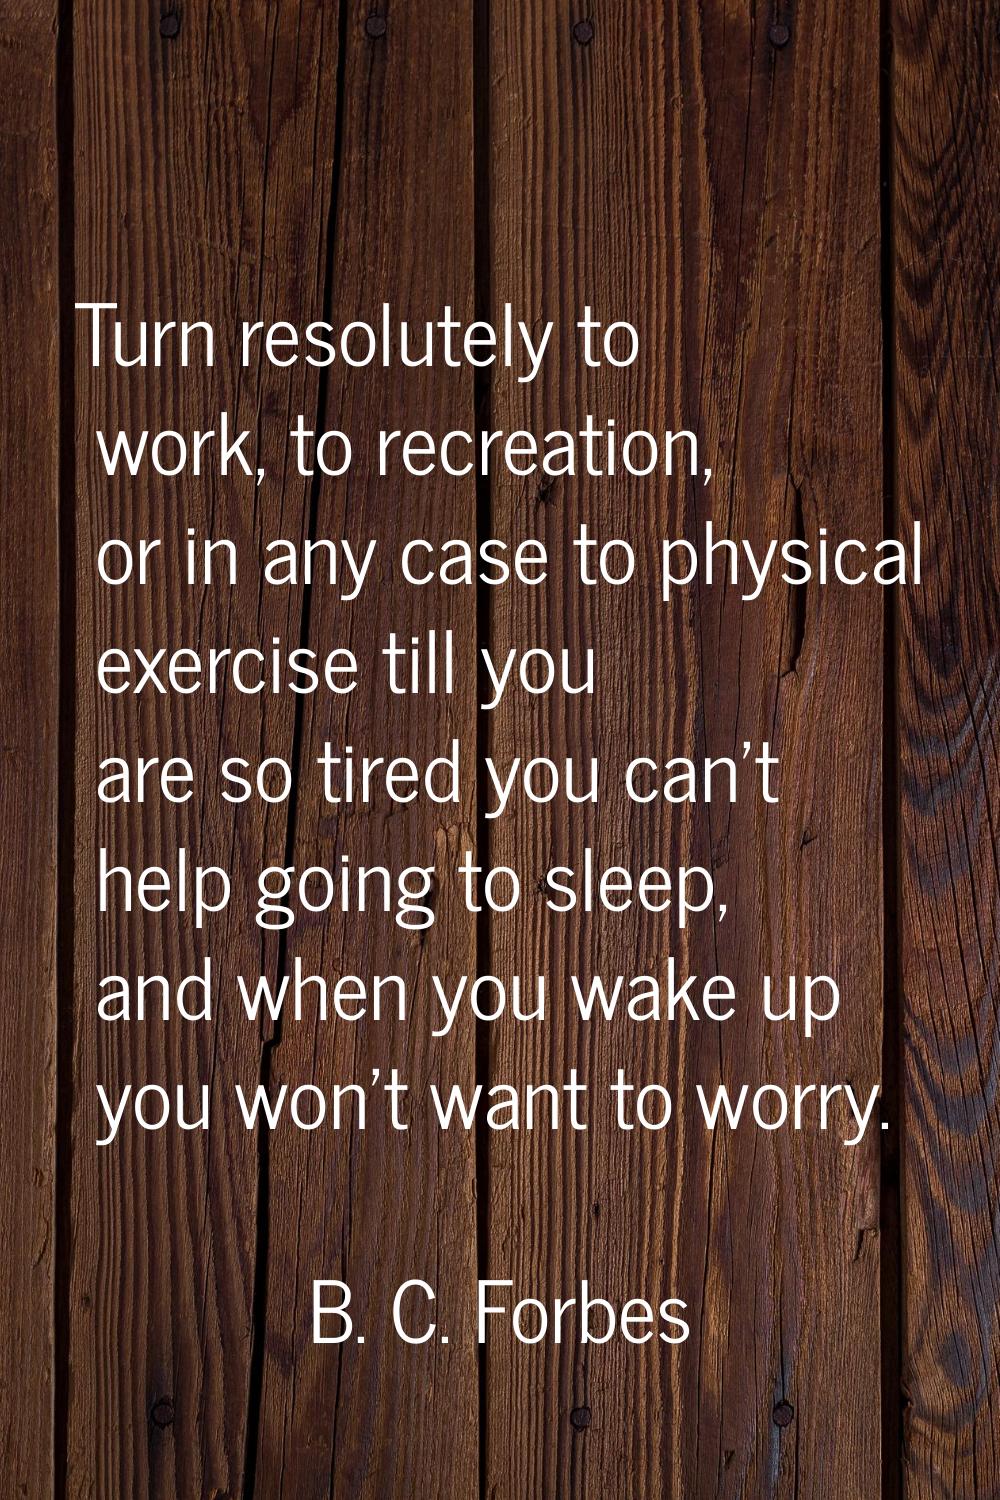 Turn resolutely to work, to recreation, or in any case to physical exercise till you are so tired y